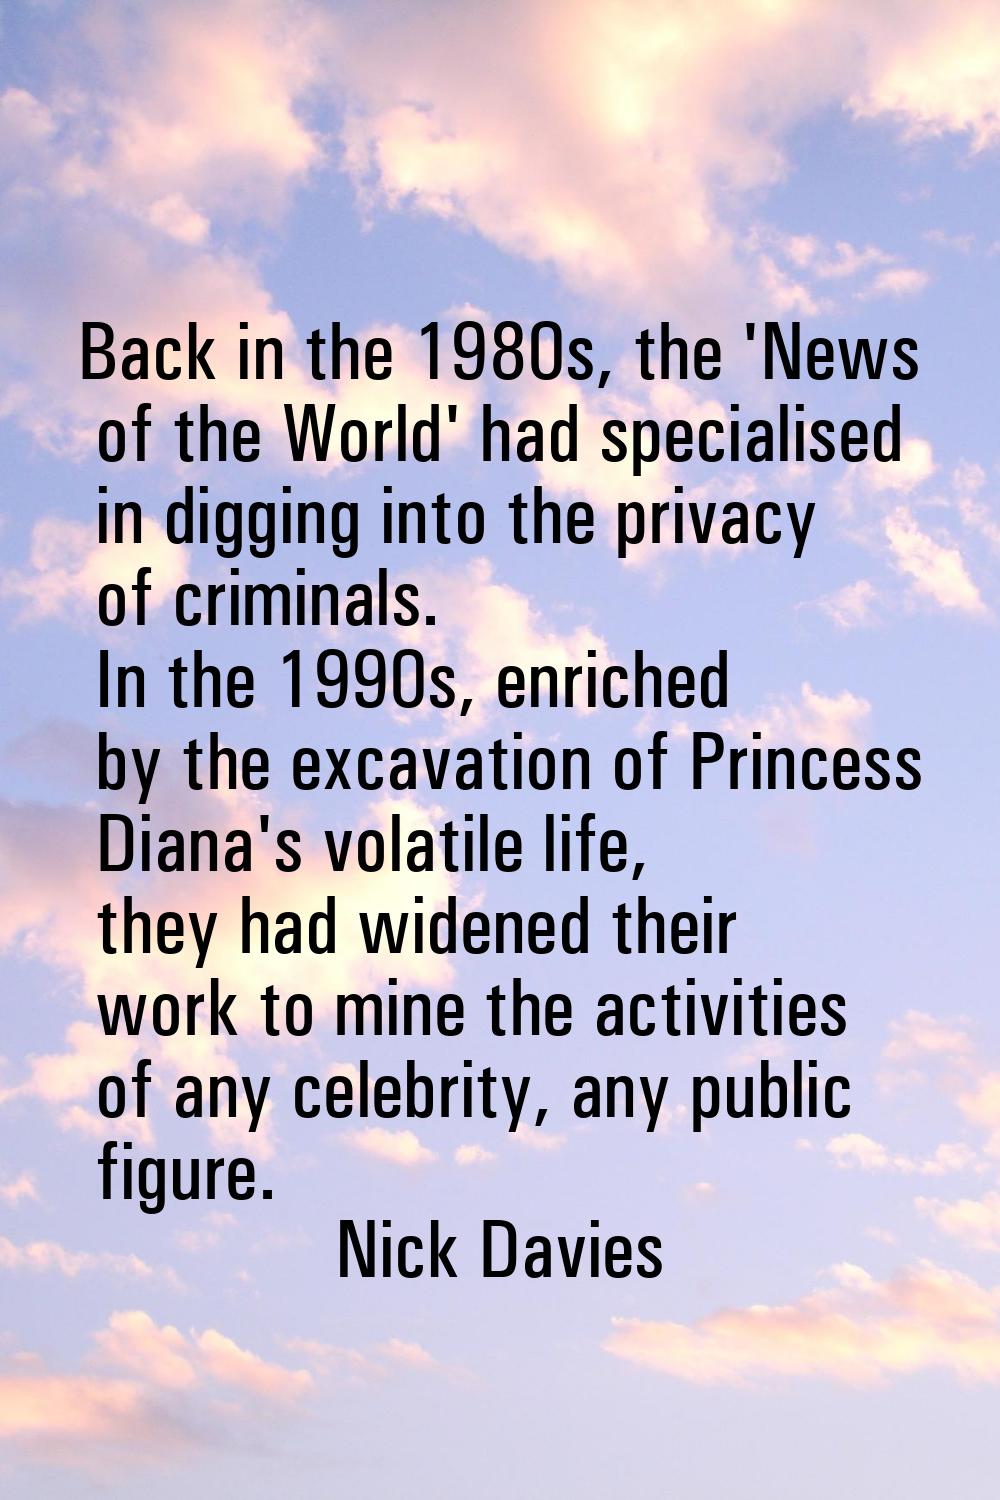 Back in the 1980s, the 'News of the World' had specialised in digging into the privacy of criminals